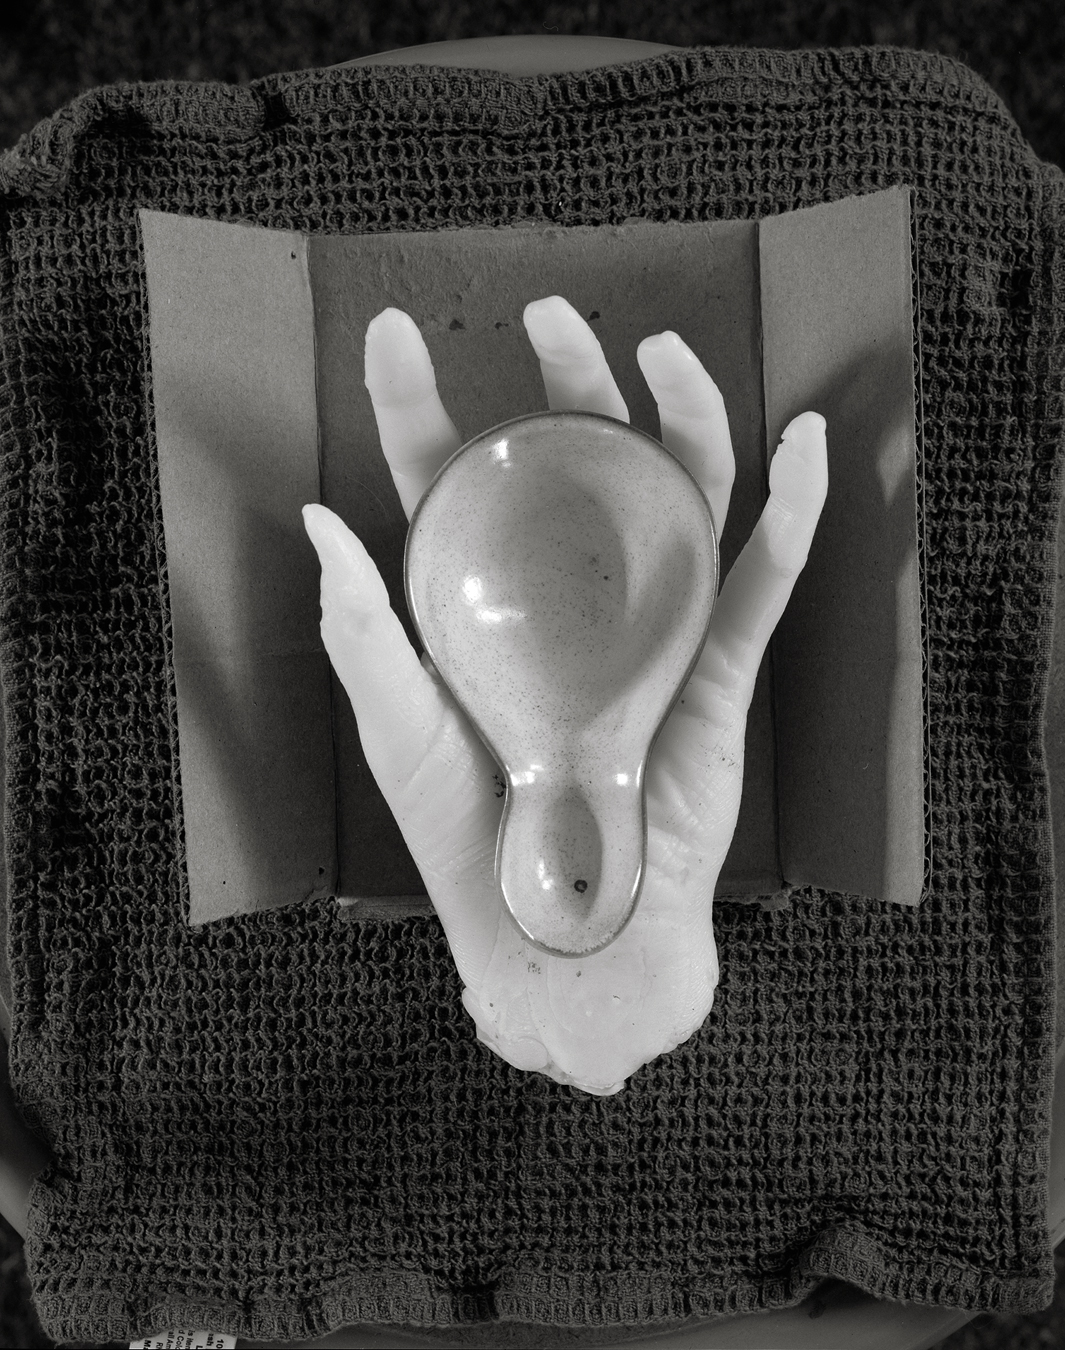 Megan Ledbetter, 2014. Black and white photograph of a wax hand holding an object that resembles a light bulb. They are set on a tri-fold piece of corrugated cardboard. the surface is a loosely woven fabric.